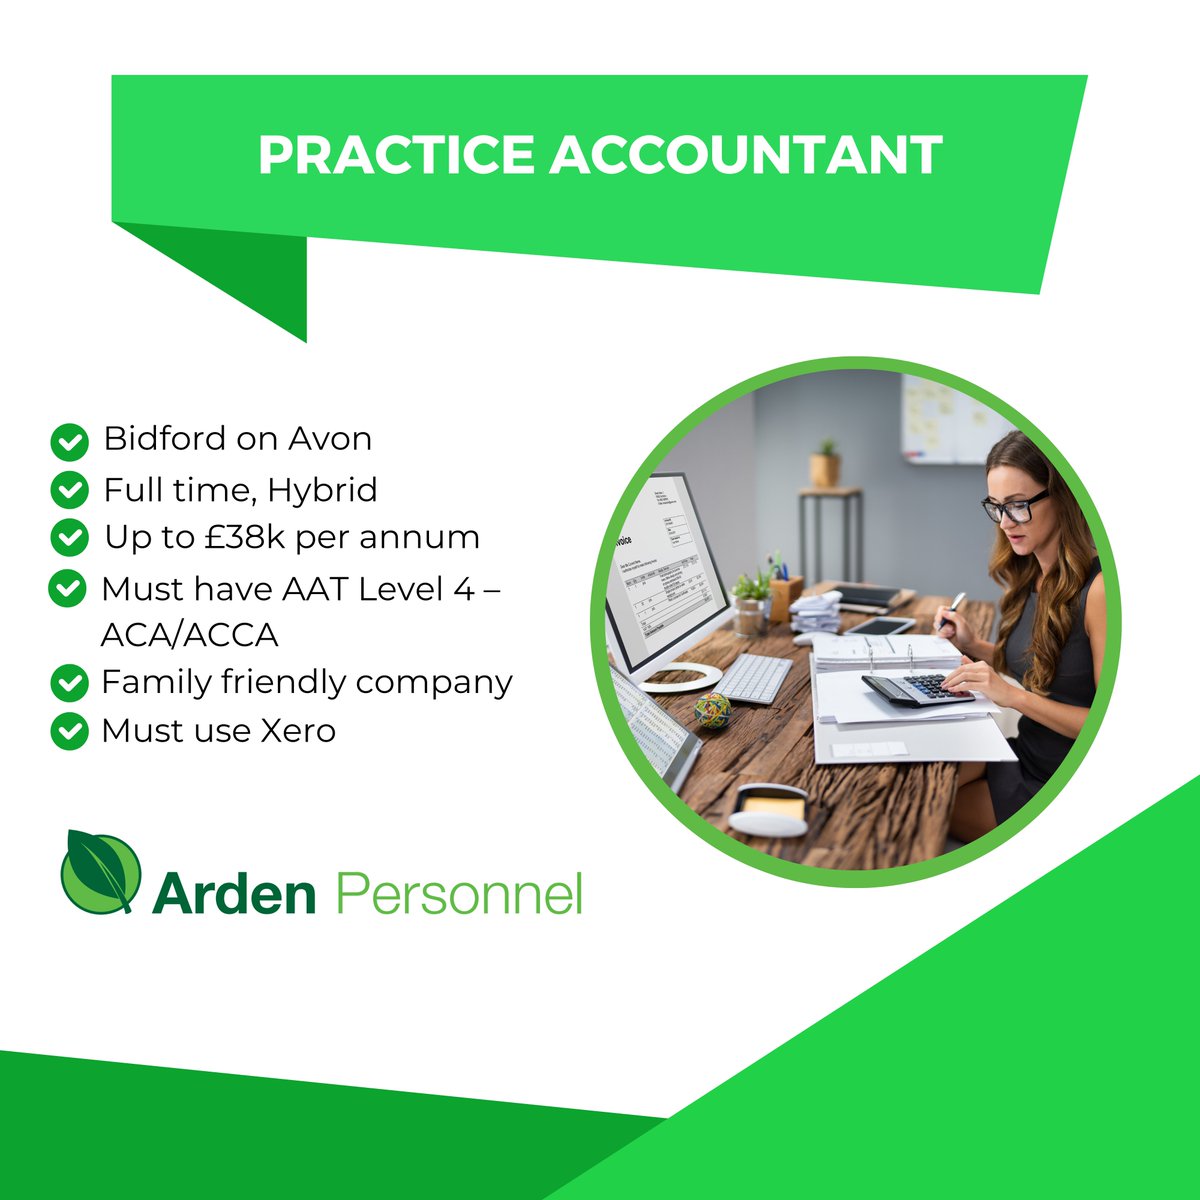 Are you an experienced Practice Accountant? This role may be perfect for you? Click here for more information ow.ly/gm7150P3m2E